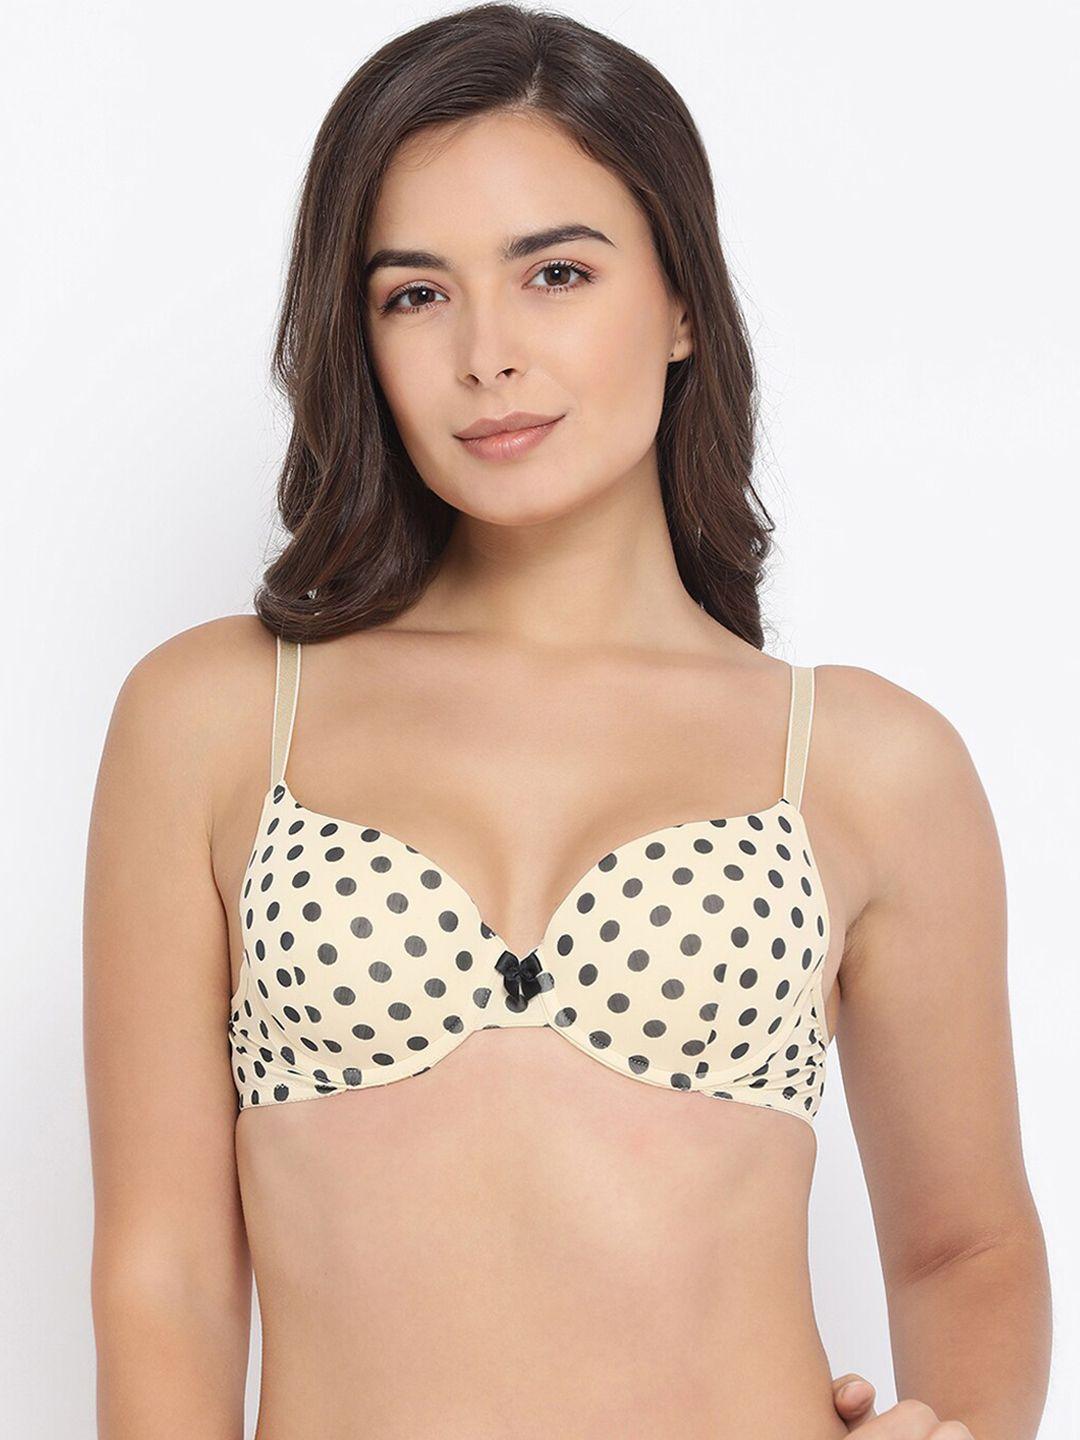 macrowoman w-series polka dots printed lightly padded t-shirt bra with all day comfort